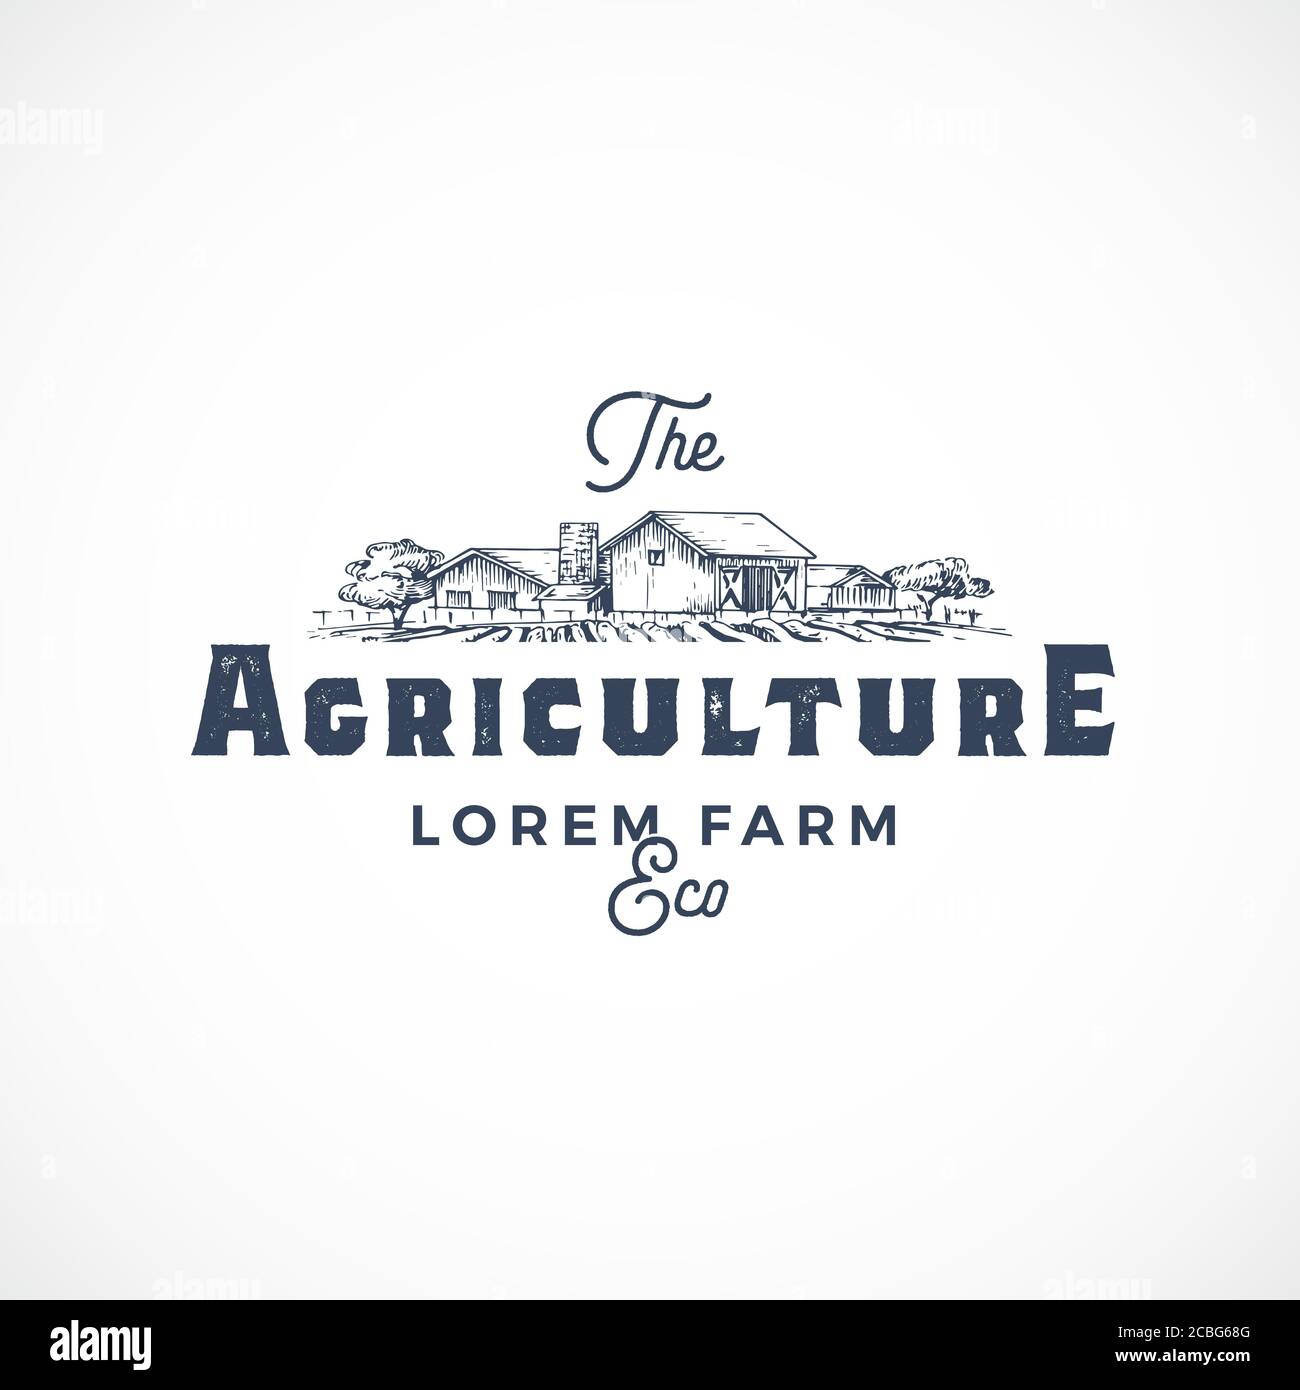 Agriculture Farm Abstract Vector Sign, Symbol or Logo Template. Farm Landscape Drawing Sketch with Retro Typography. Rural Fields and Buildings Stock Vector